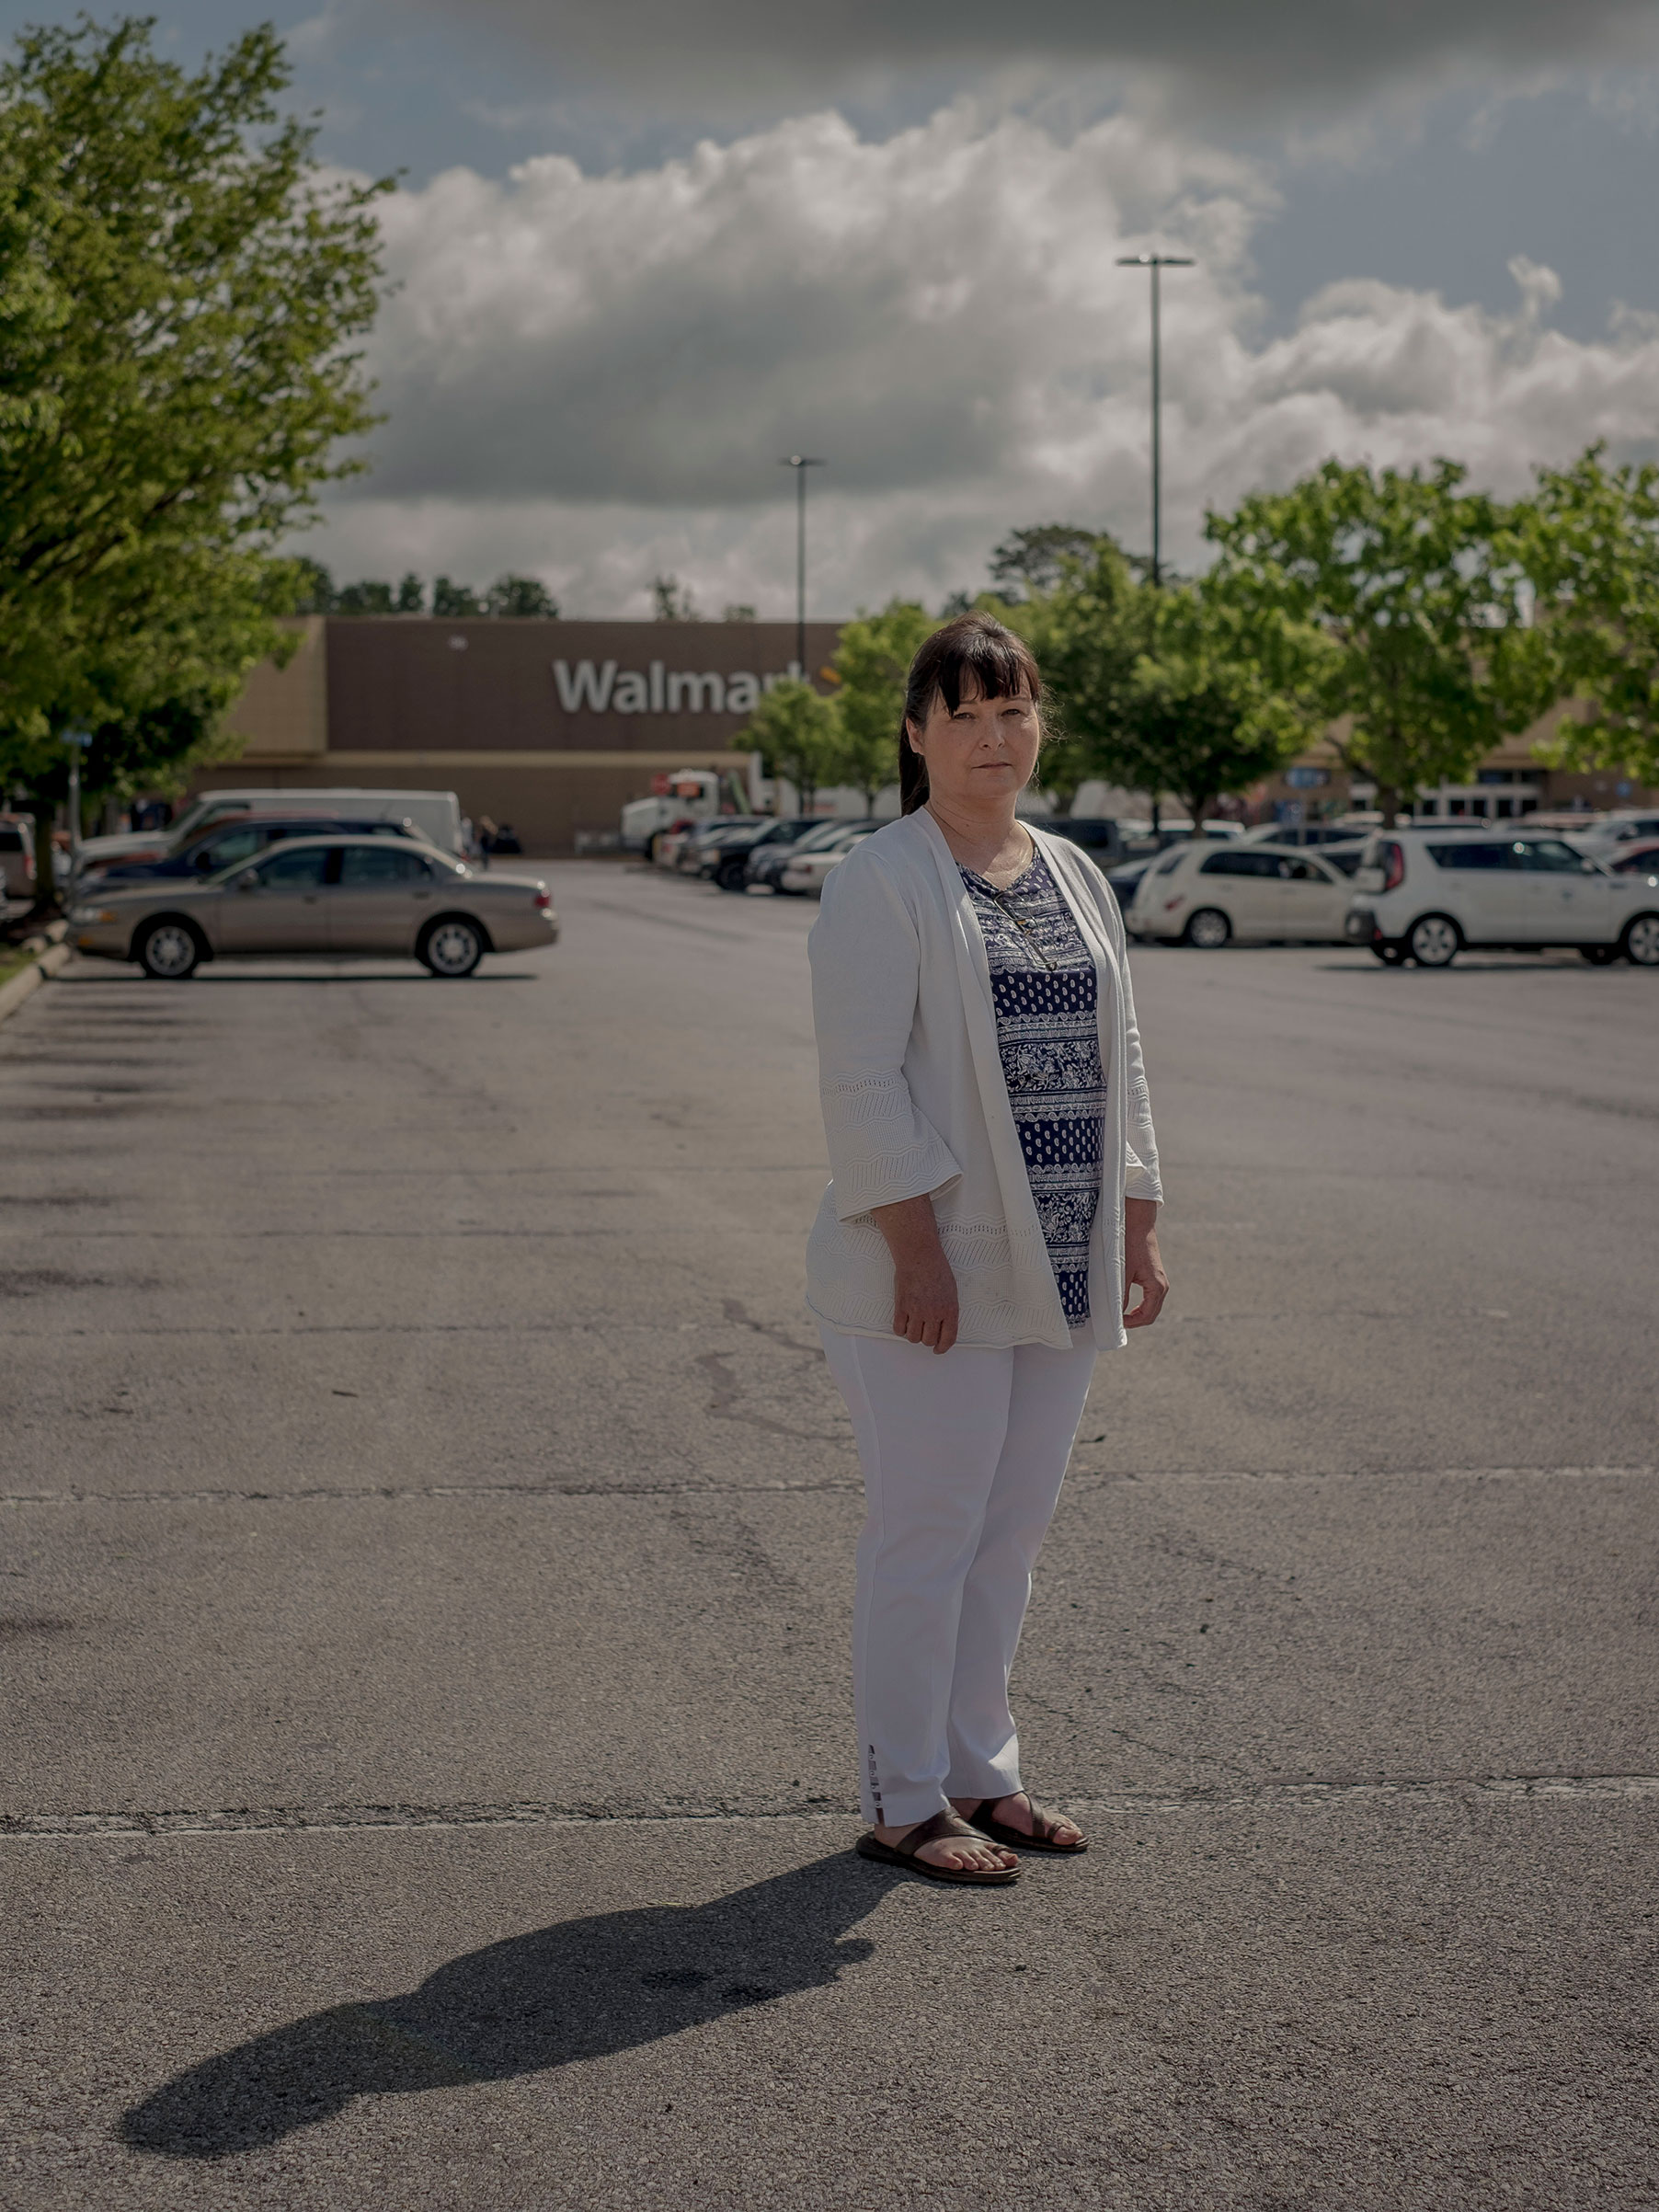 In a lawsuit filed against Walmart this month, Stephanie Chapman alleges that she was paid less than men in similar positions (Gabriella Demczuk for TIME)